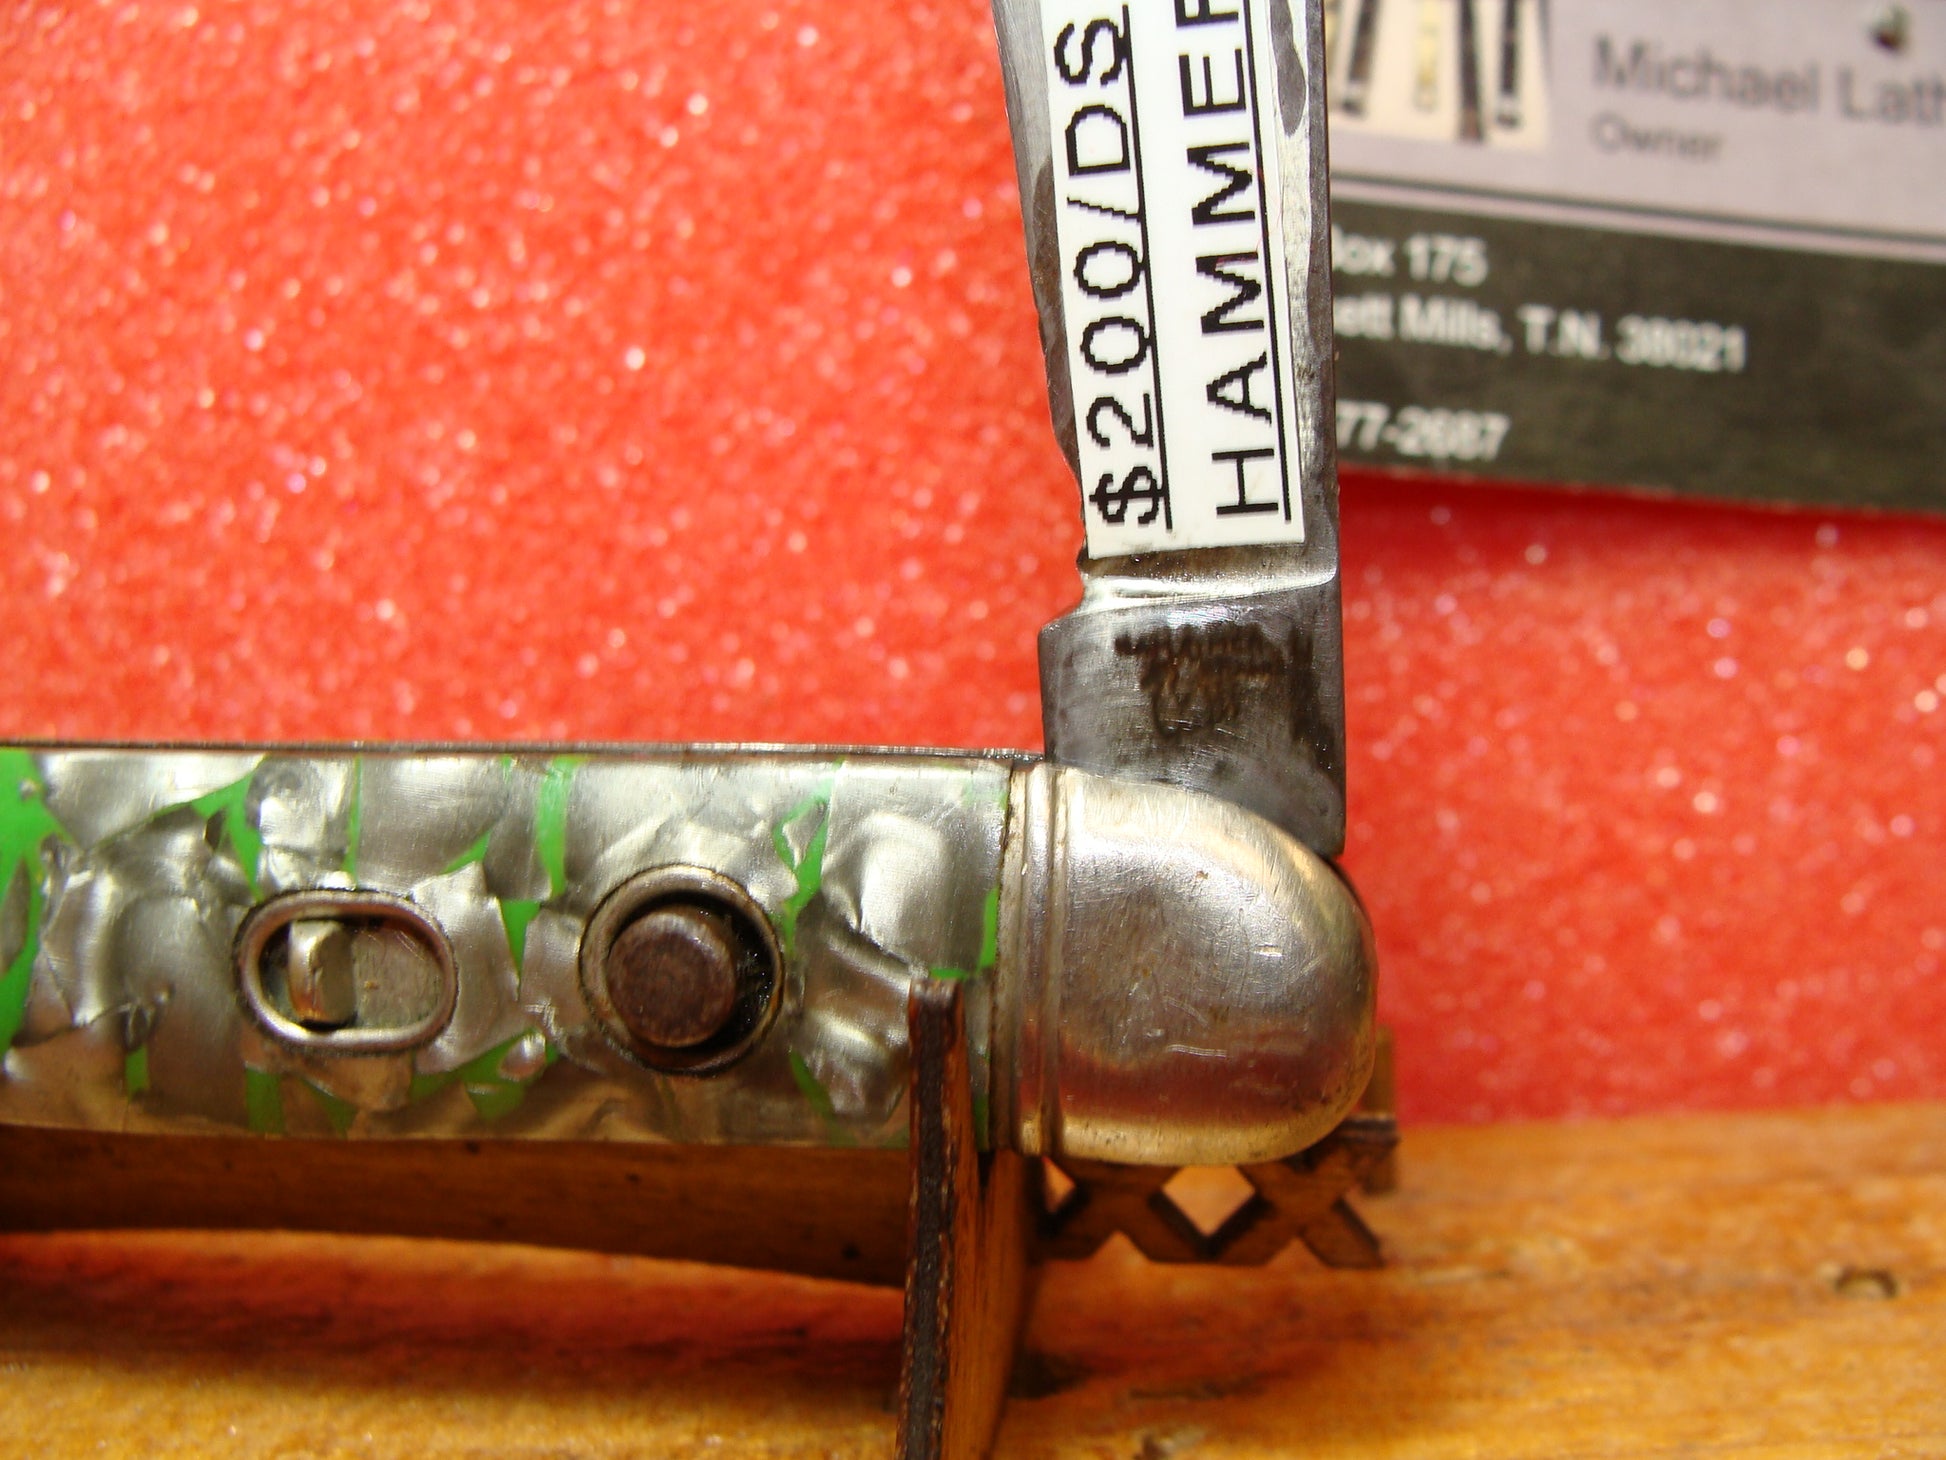 HAMMER BRAND IMPERIAL CUT 1945-55 VINTAGE AMERICAN AUTOMATIC KNIFE 3 1 –  Latham's Vintage Sales